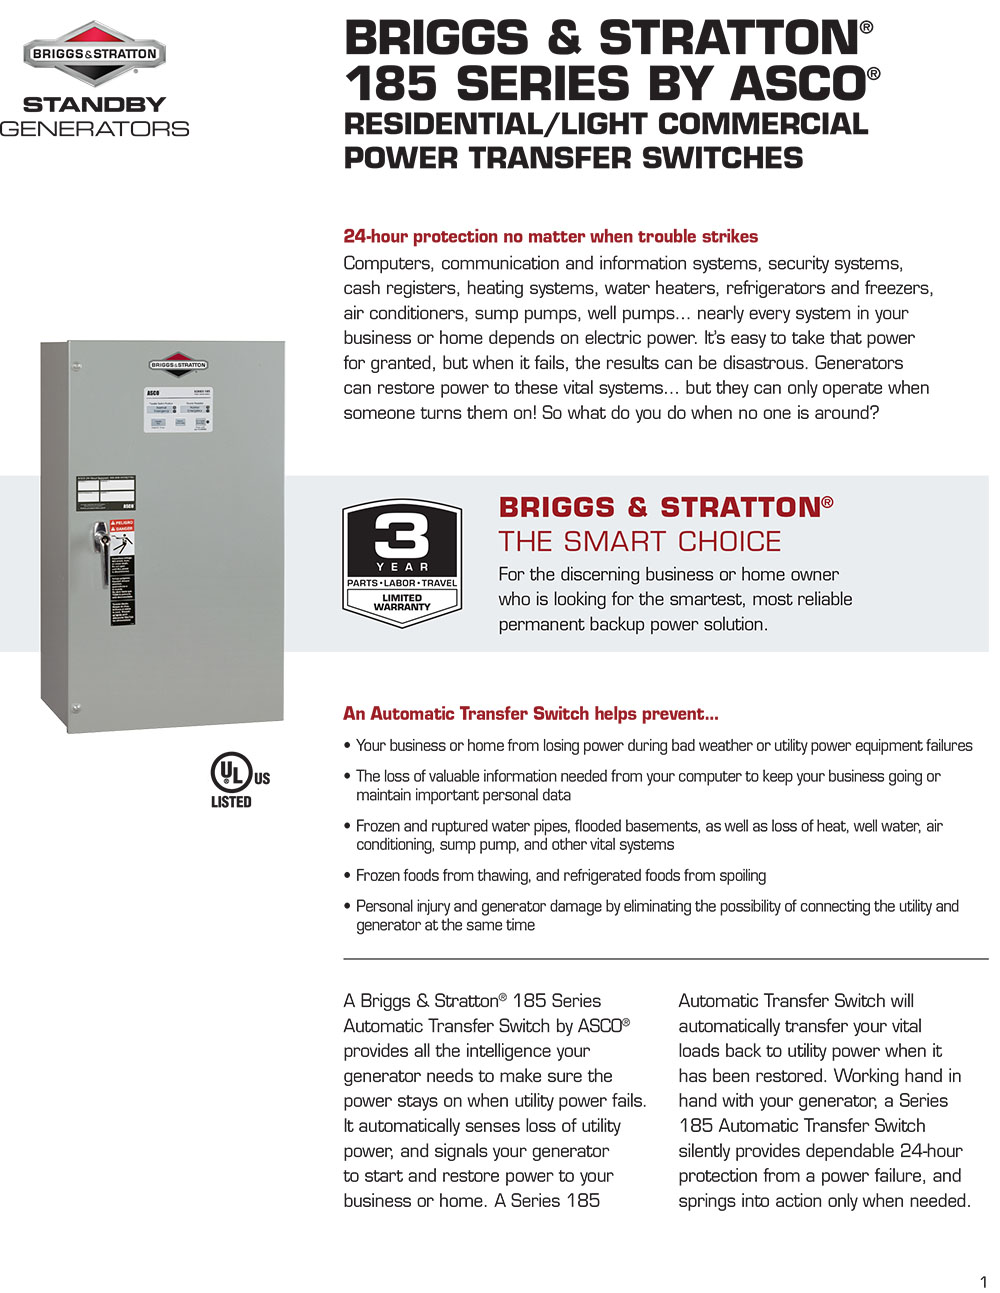 A Briggs & Stratton® 185 Series Automatic Transfer Switch by ASCO® provides all the intelligence your generator needs to make sure the power stays on when utility power fails. It automatically senses loss of utility power, and signals your generator to start and restore power to your business or home.